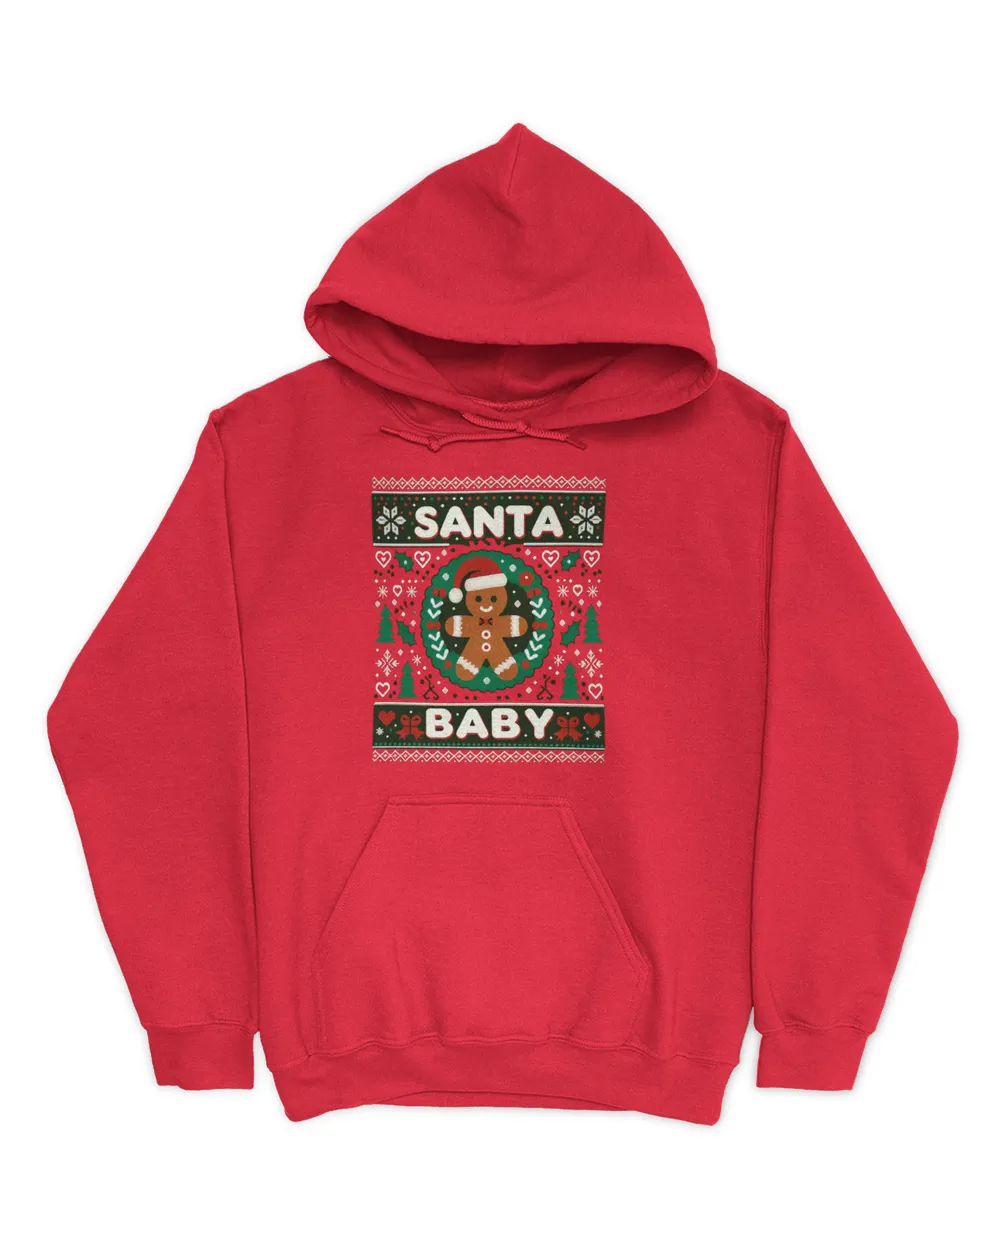 Santa Baby Pregnancy Announcement - Ugly Christmas Sweater